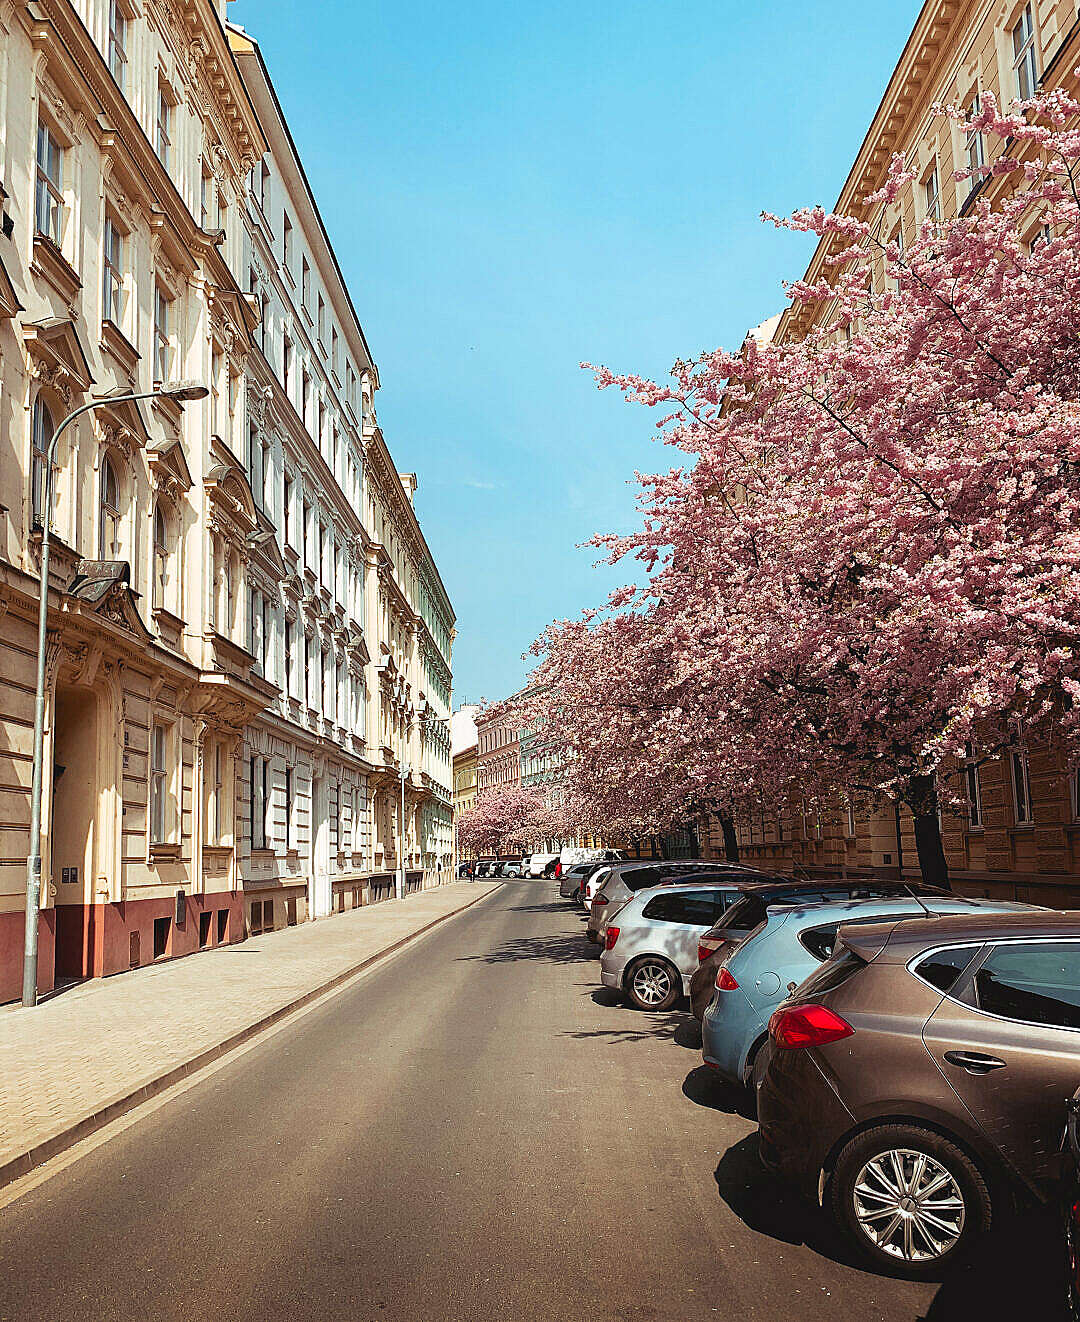 Download Street Full of Blooming Trees in Brno, Czechia FREE Stock Photo